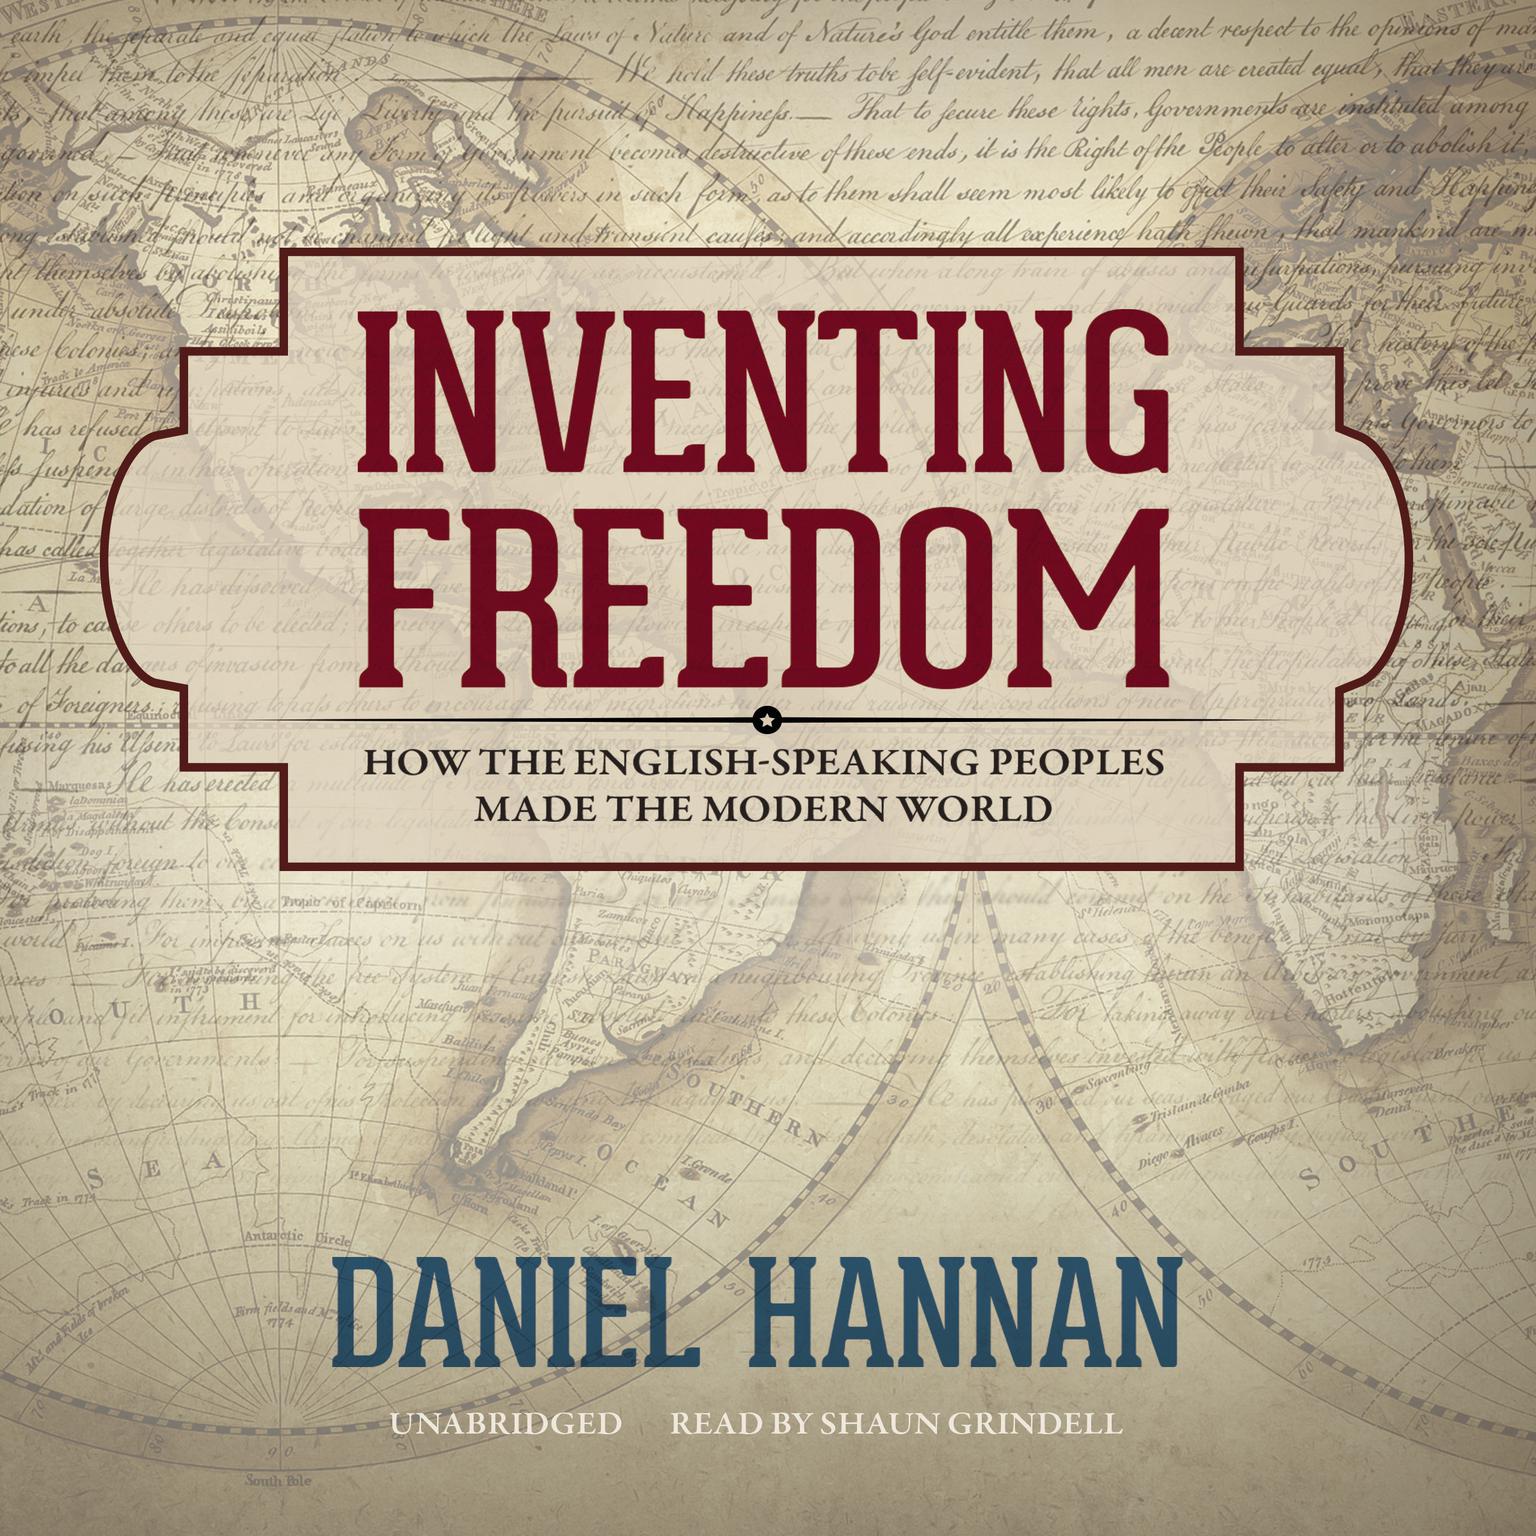 Inventing Freedom: How the English-Speaking Peoples Made the Modern World Audiobook, by Daniel Hannan